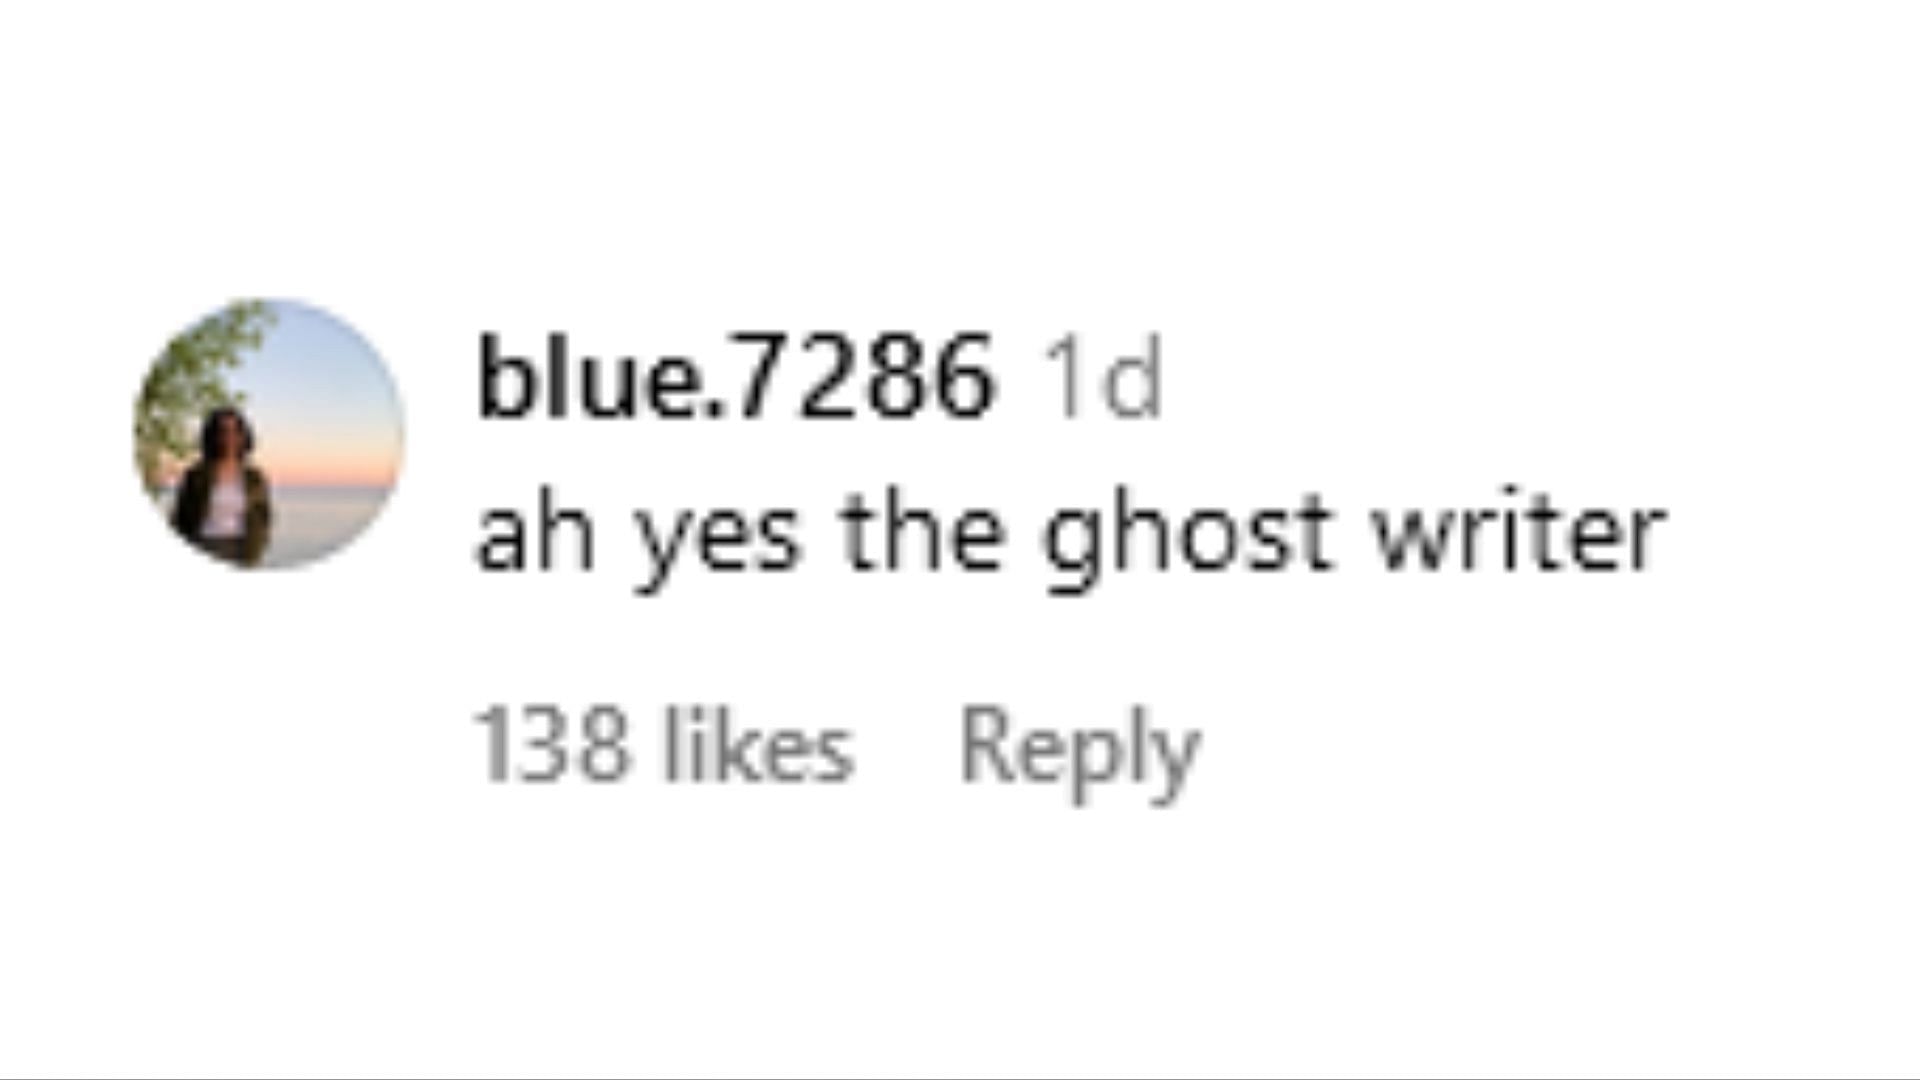 Netizens react as the possibility of the involvement of a ghostwriter emerges (Image via Instagram / milliebobbybrown)